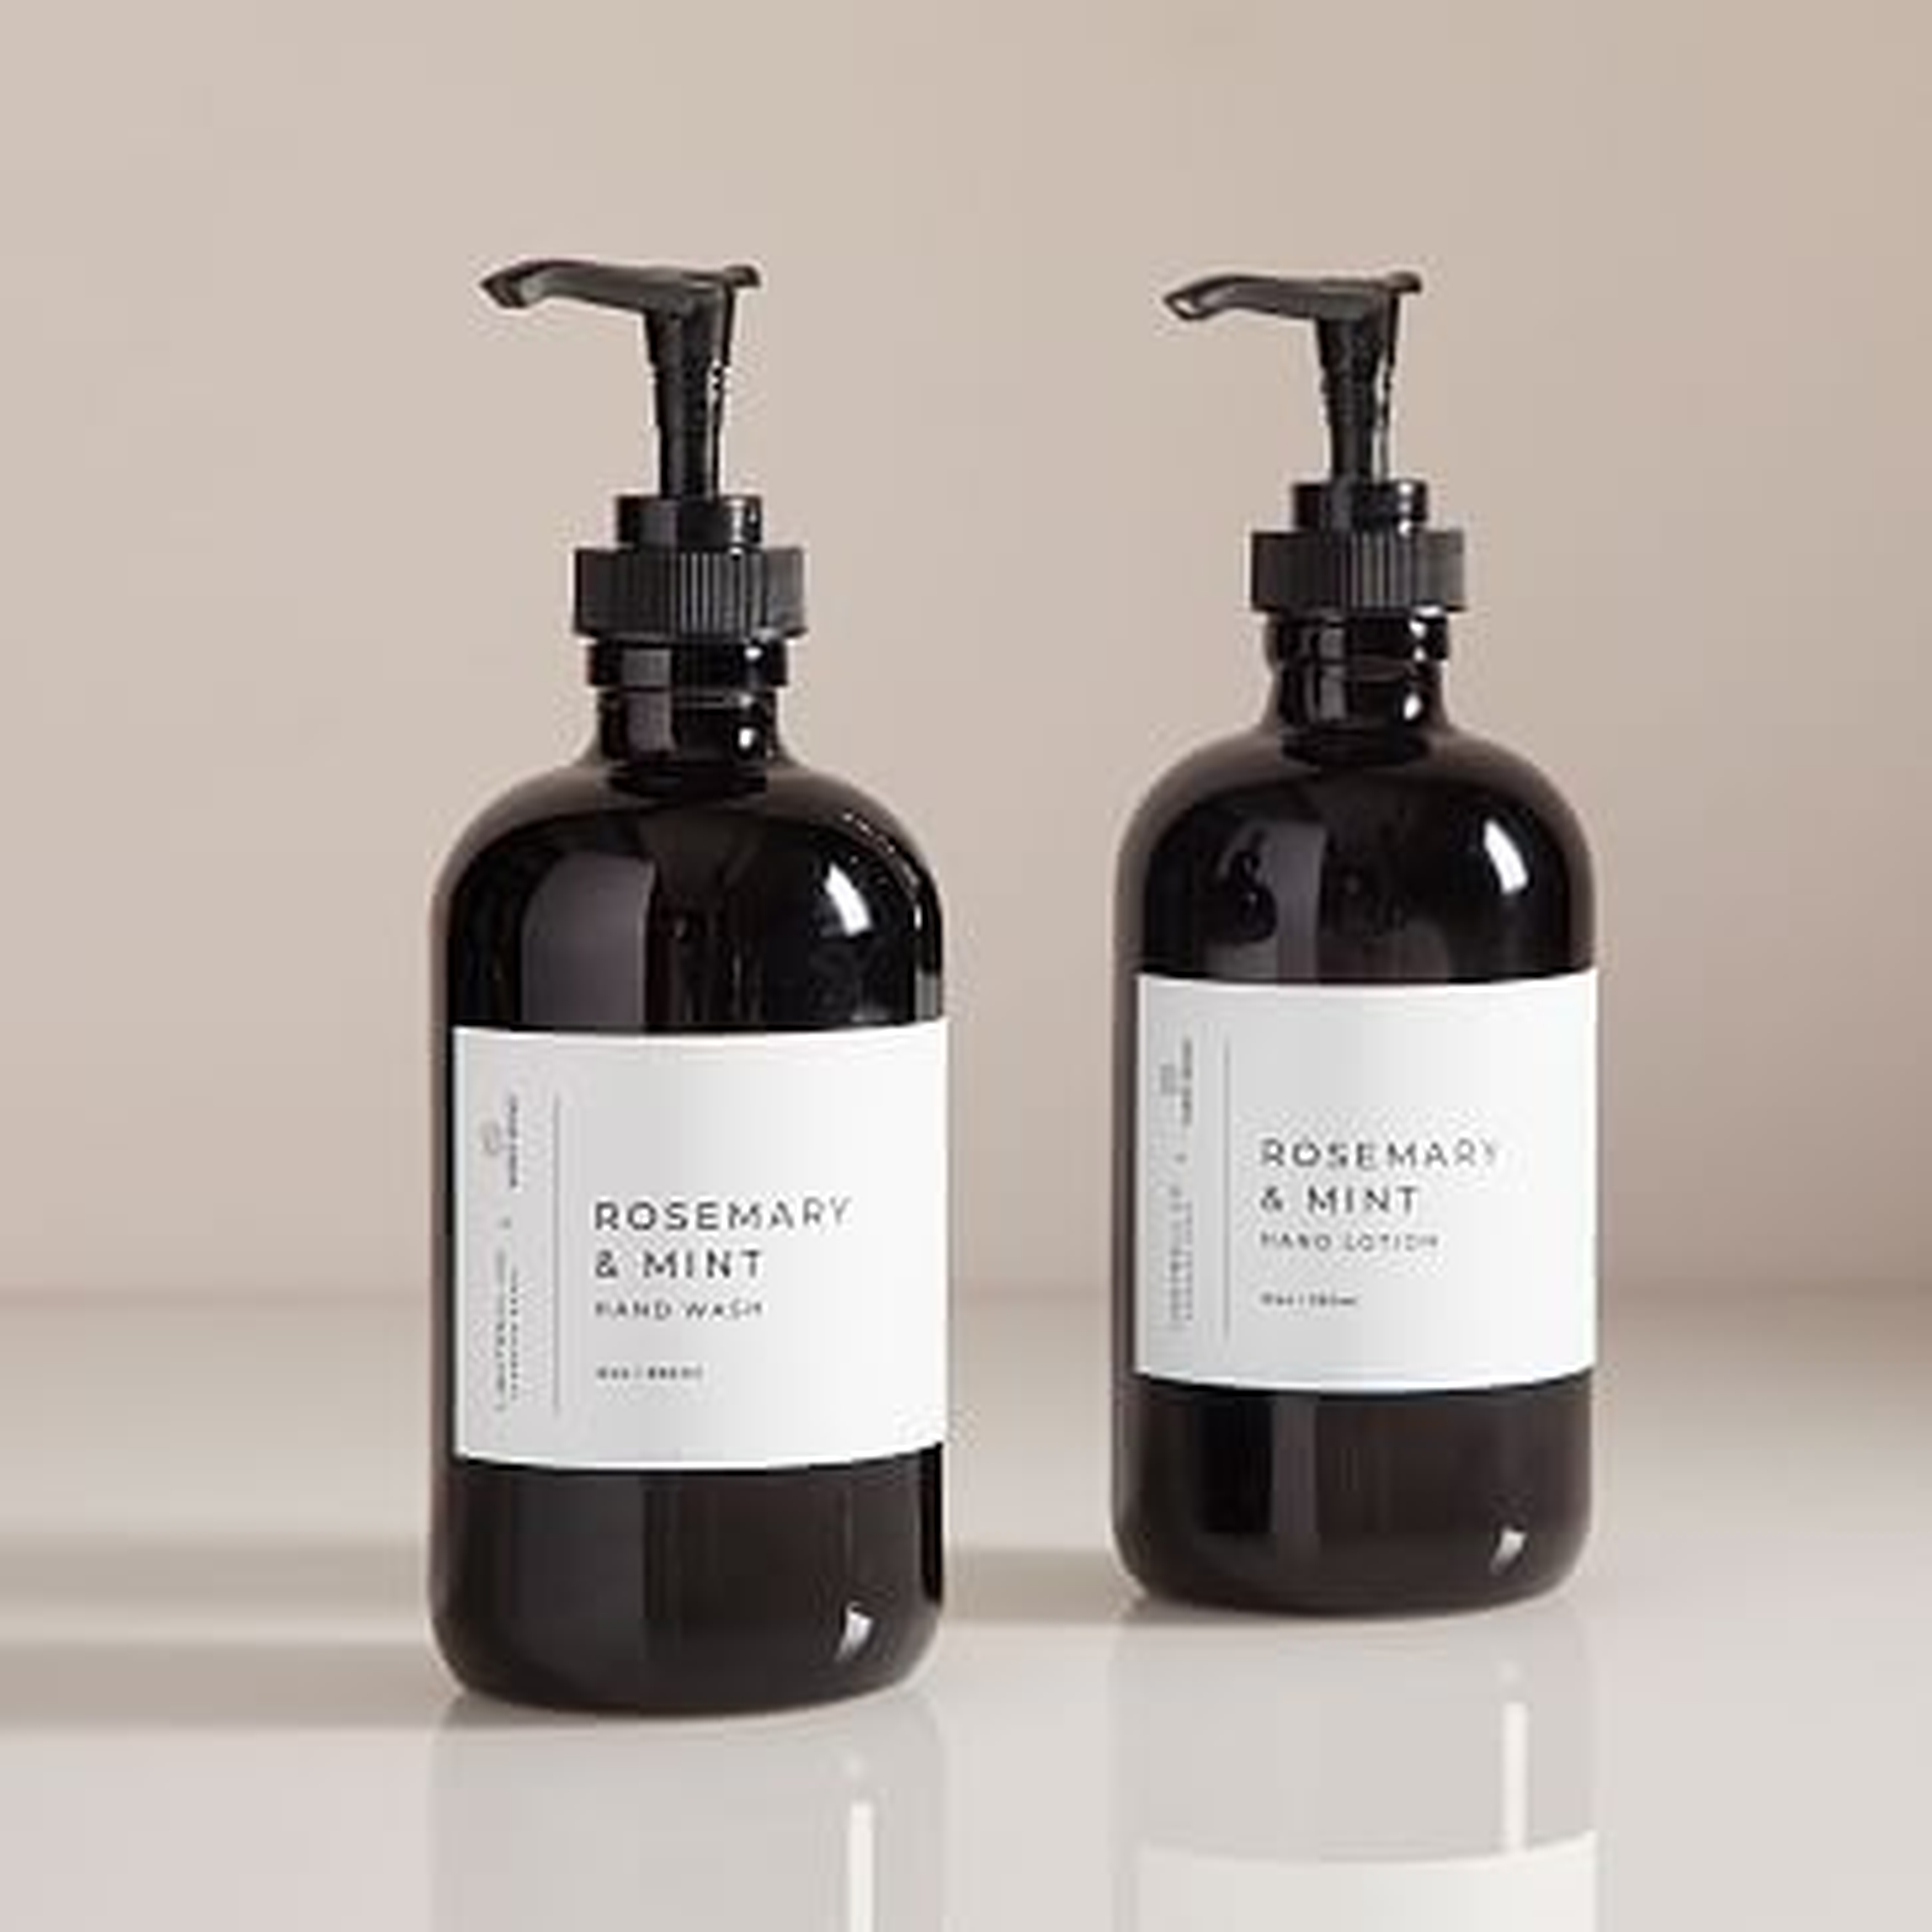 Lightwell x Water Street Hand Soap and Lotion, Rosemary + Mint - West Elm